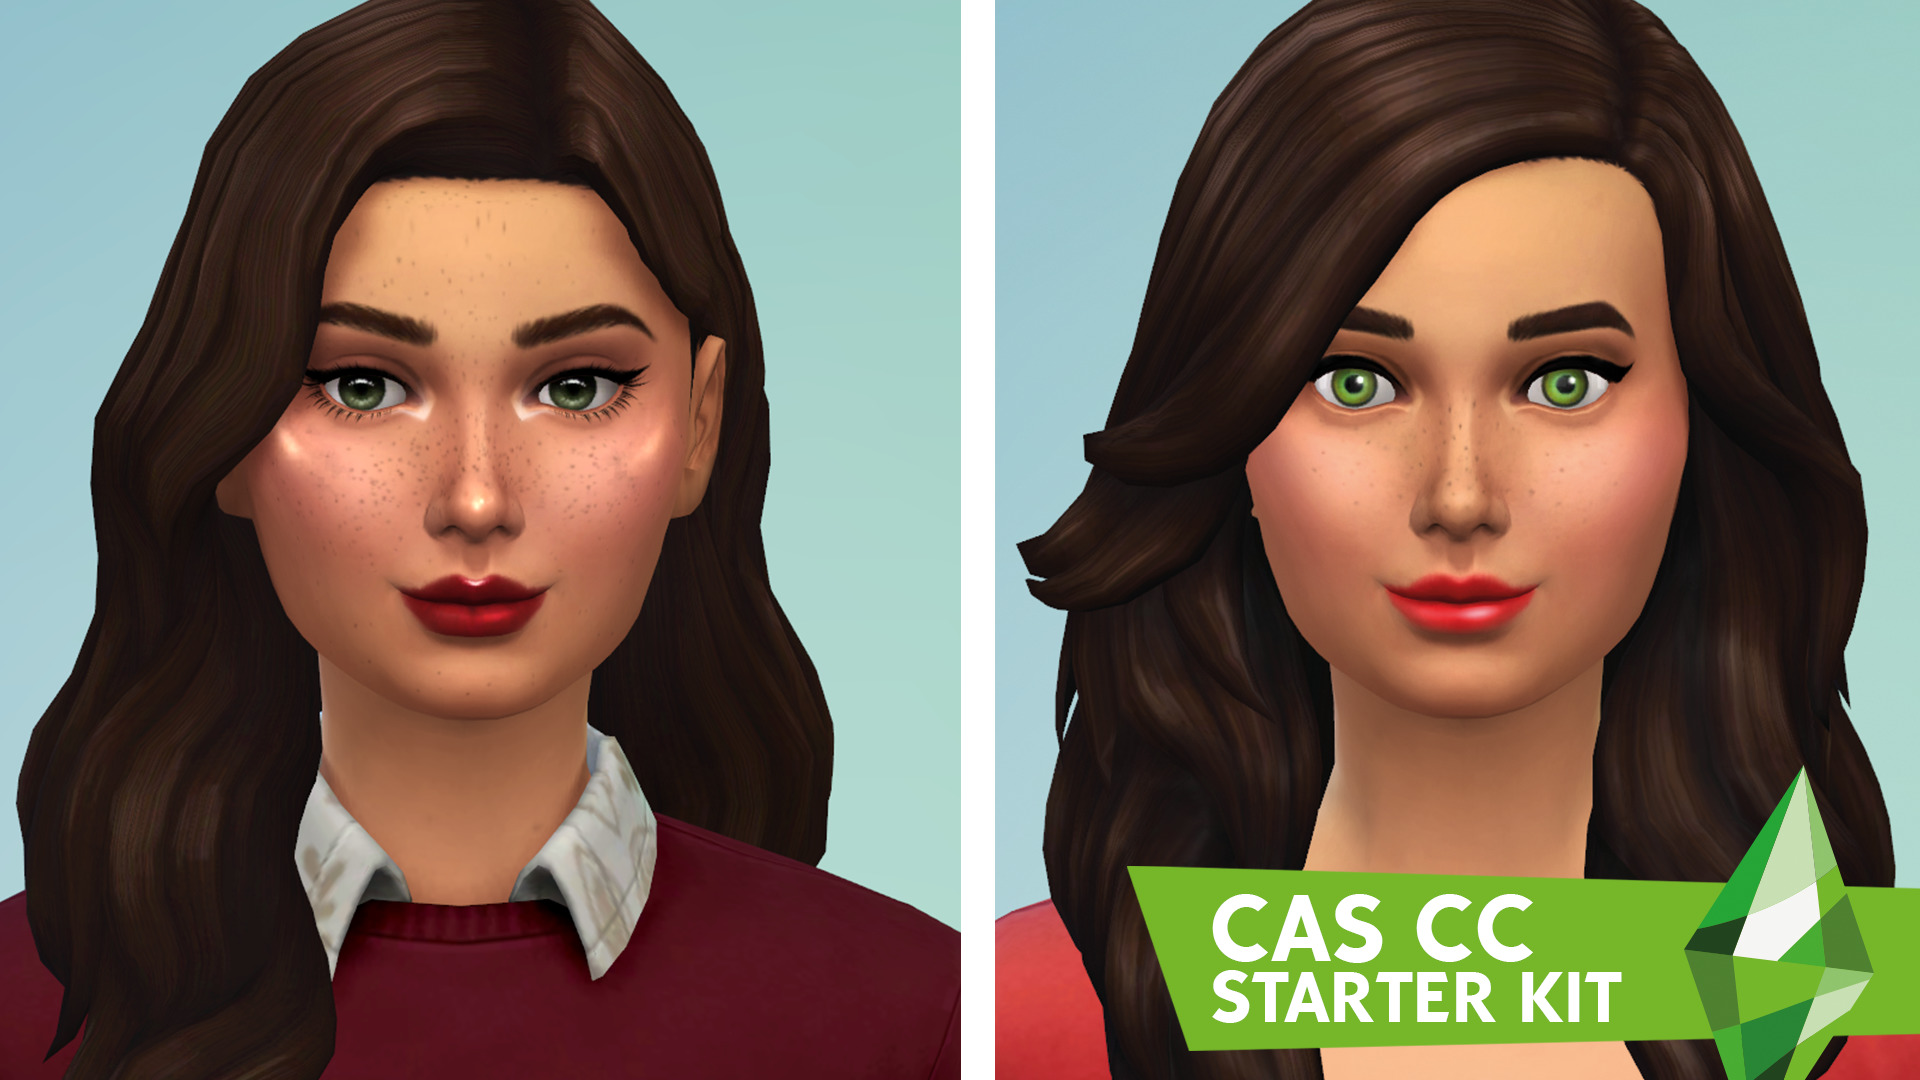 Sims Community on X: #TheSims4: Your Create A Sim CC Starter Kit